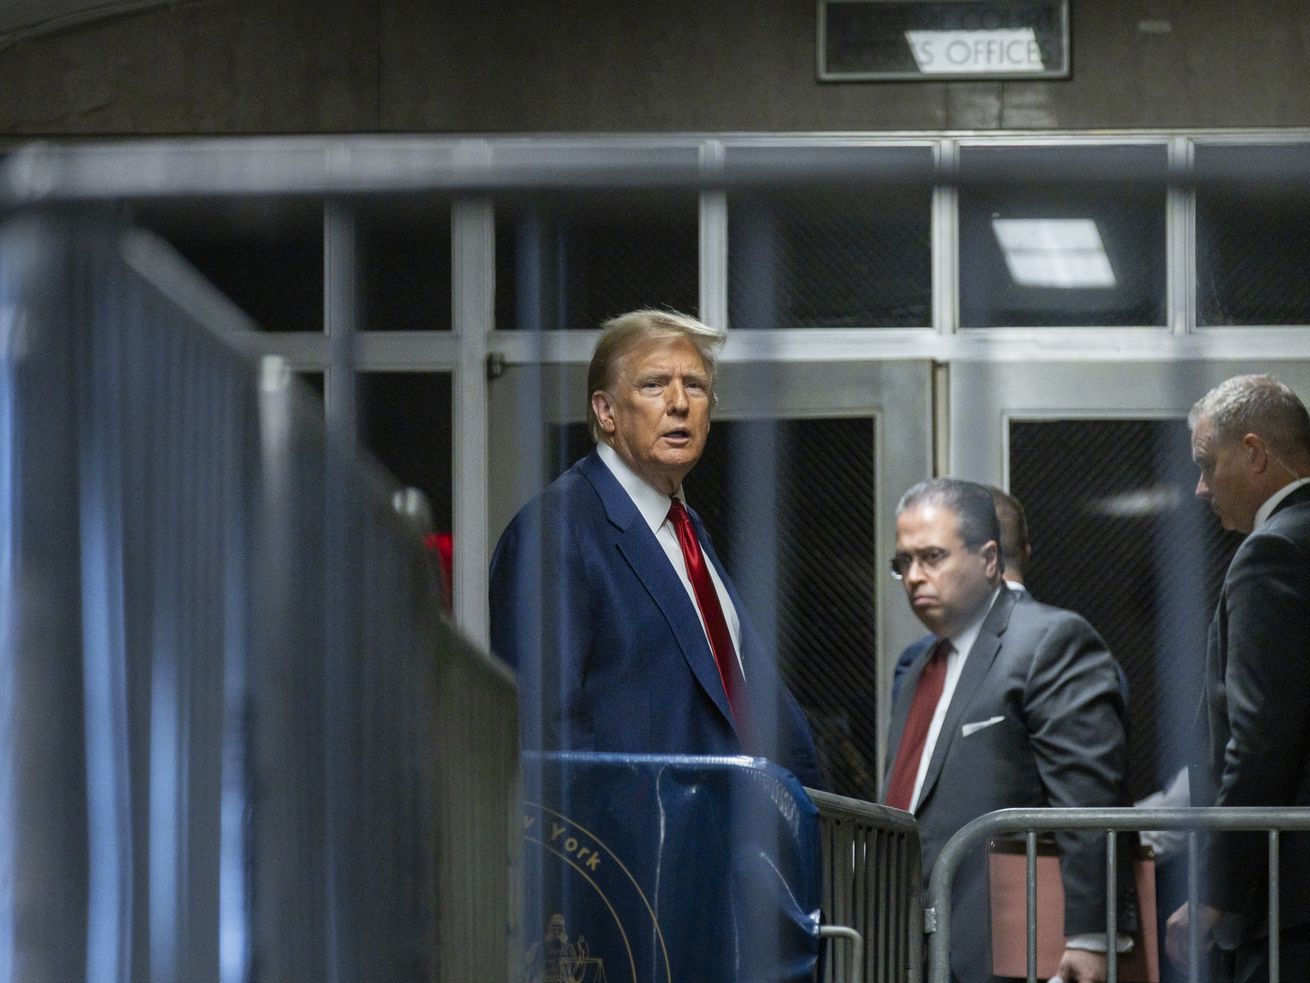 Donald Trump, in a navy suit and red tie, is seen from between barricade bars outside a New York court building, speaking to onlookers.